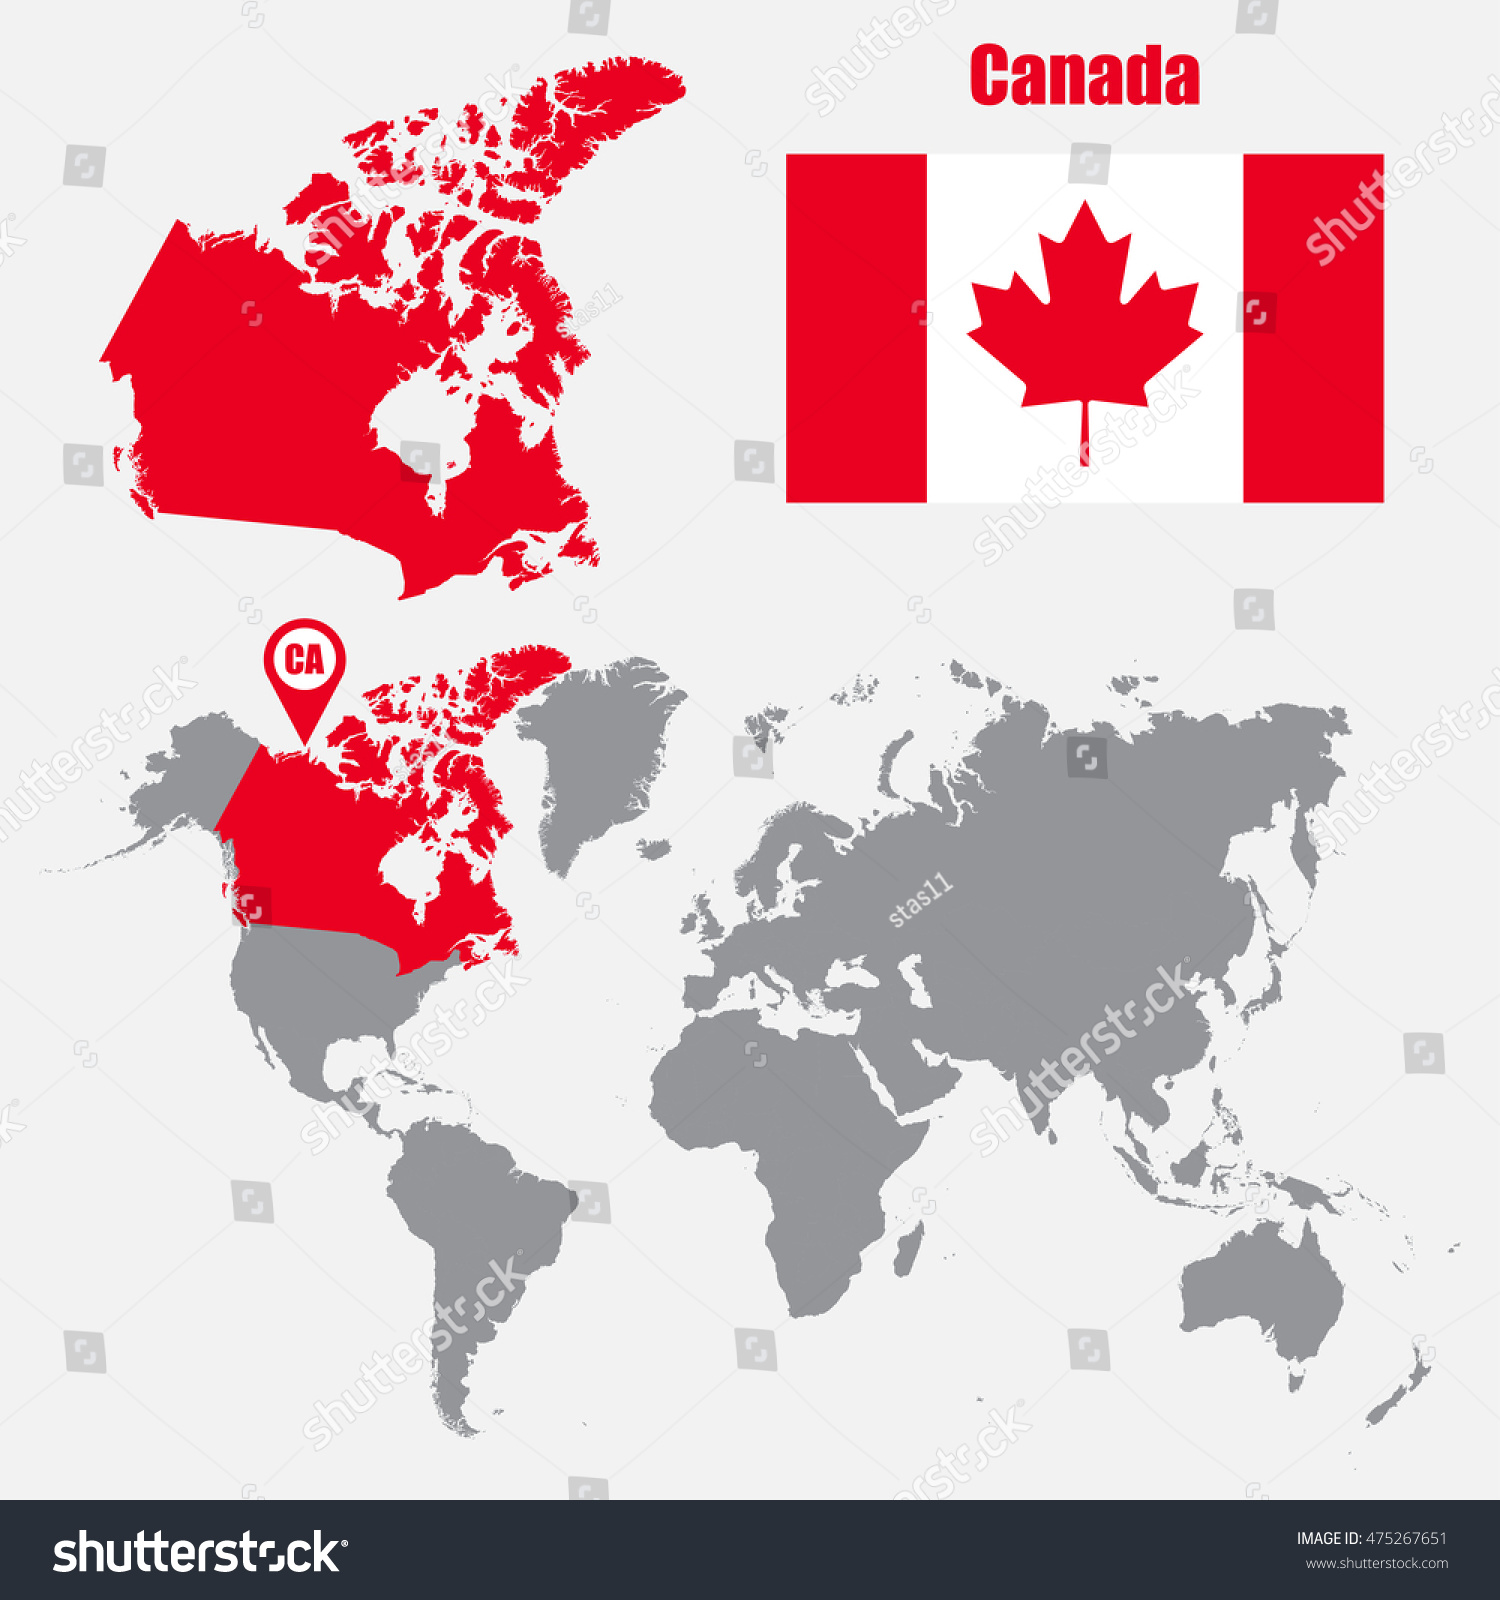 Canada Map On World Map Flag Stock Vector (Royalty Free) 475267651